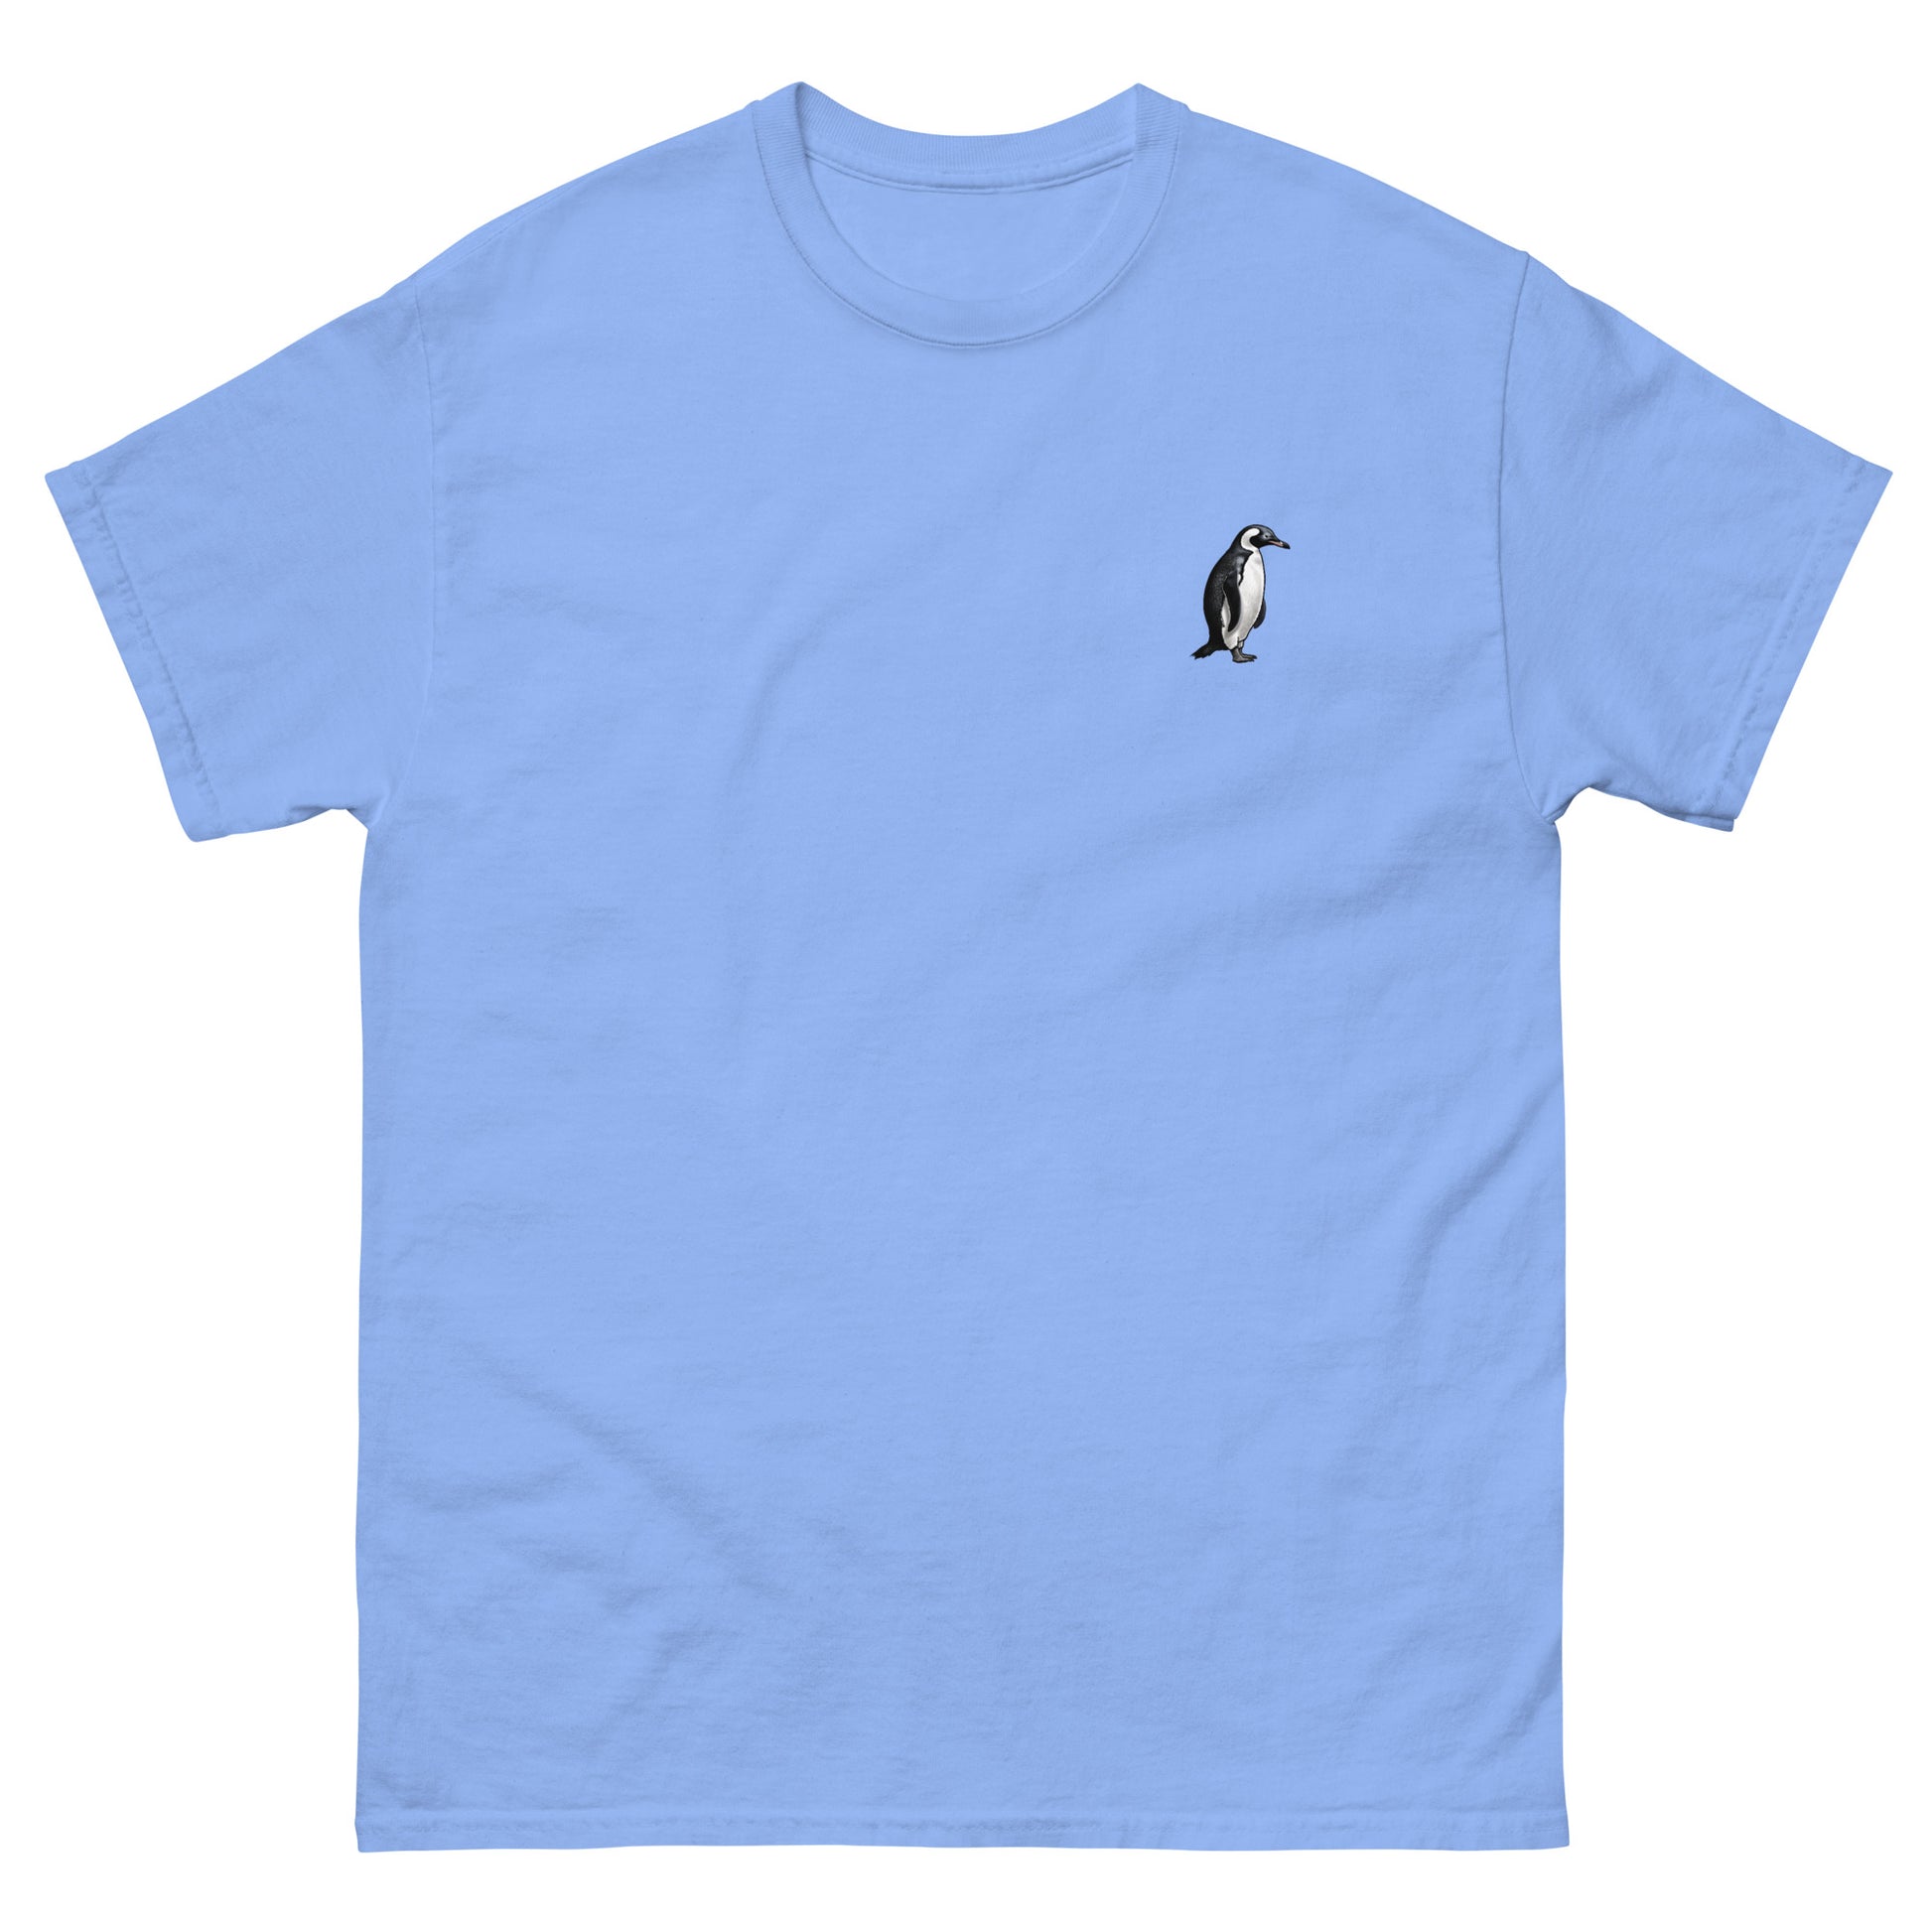 Blue High Quality Tee - Front Design with a Penguin on left chest - Back Design with a Penguin and a Phrase "Penguins:always dressed to impress, walking on ice like a boss" print